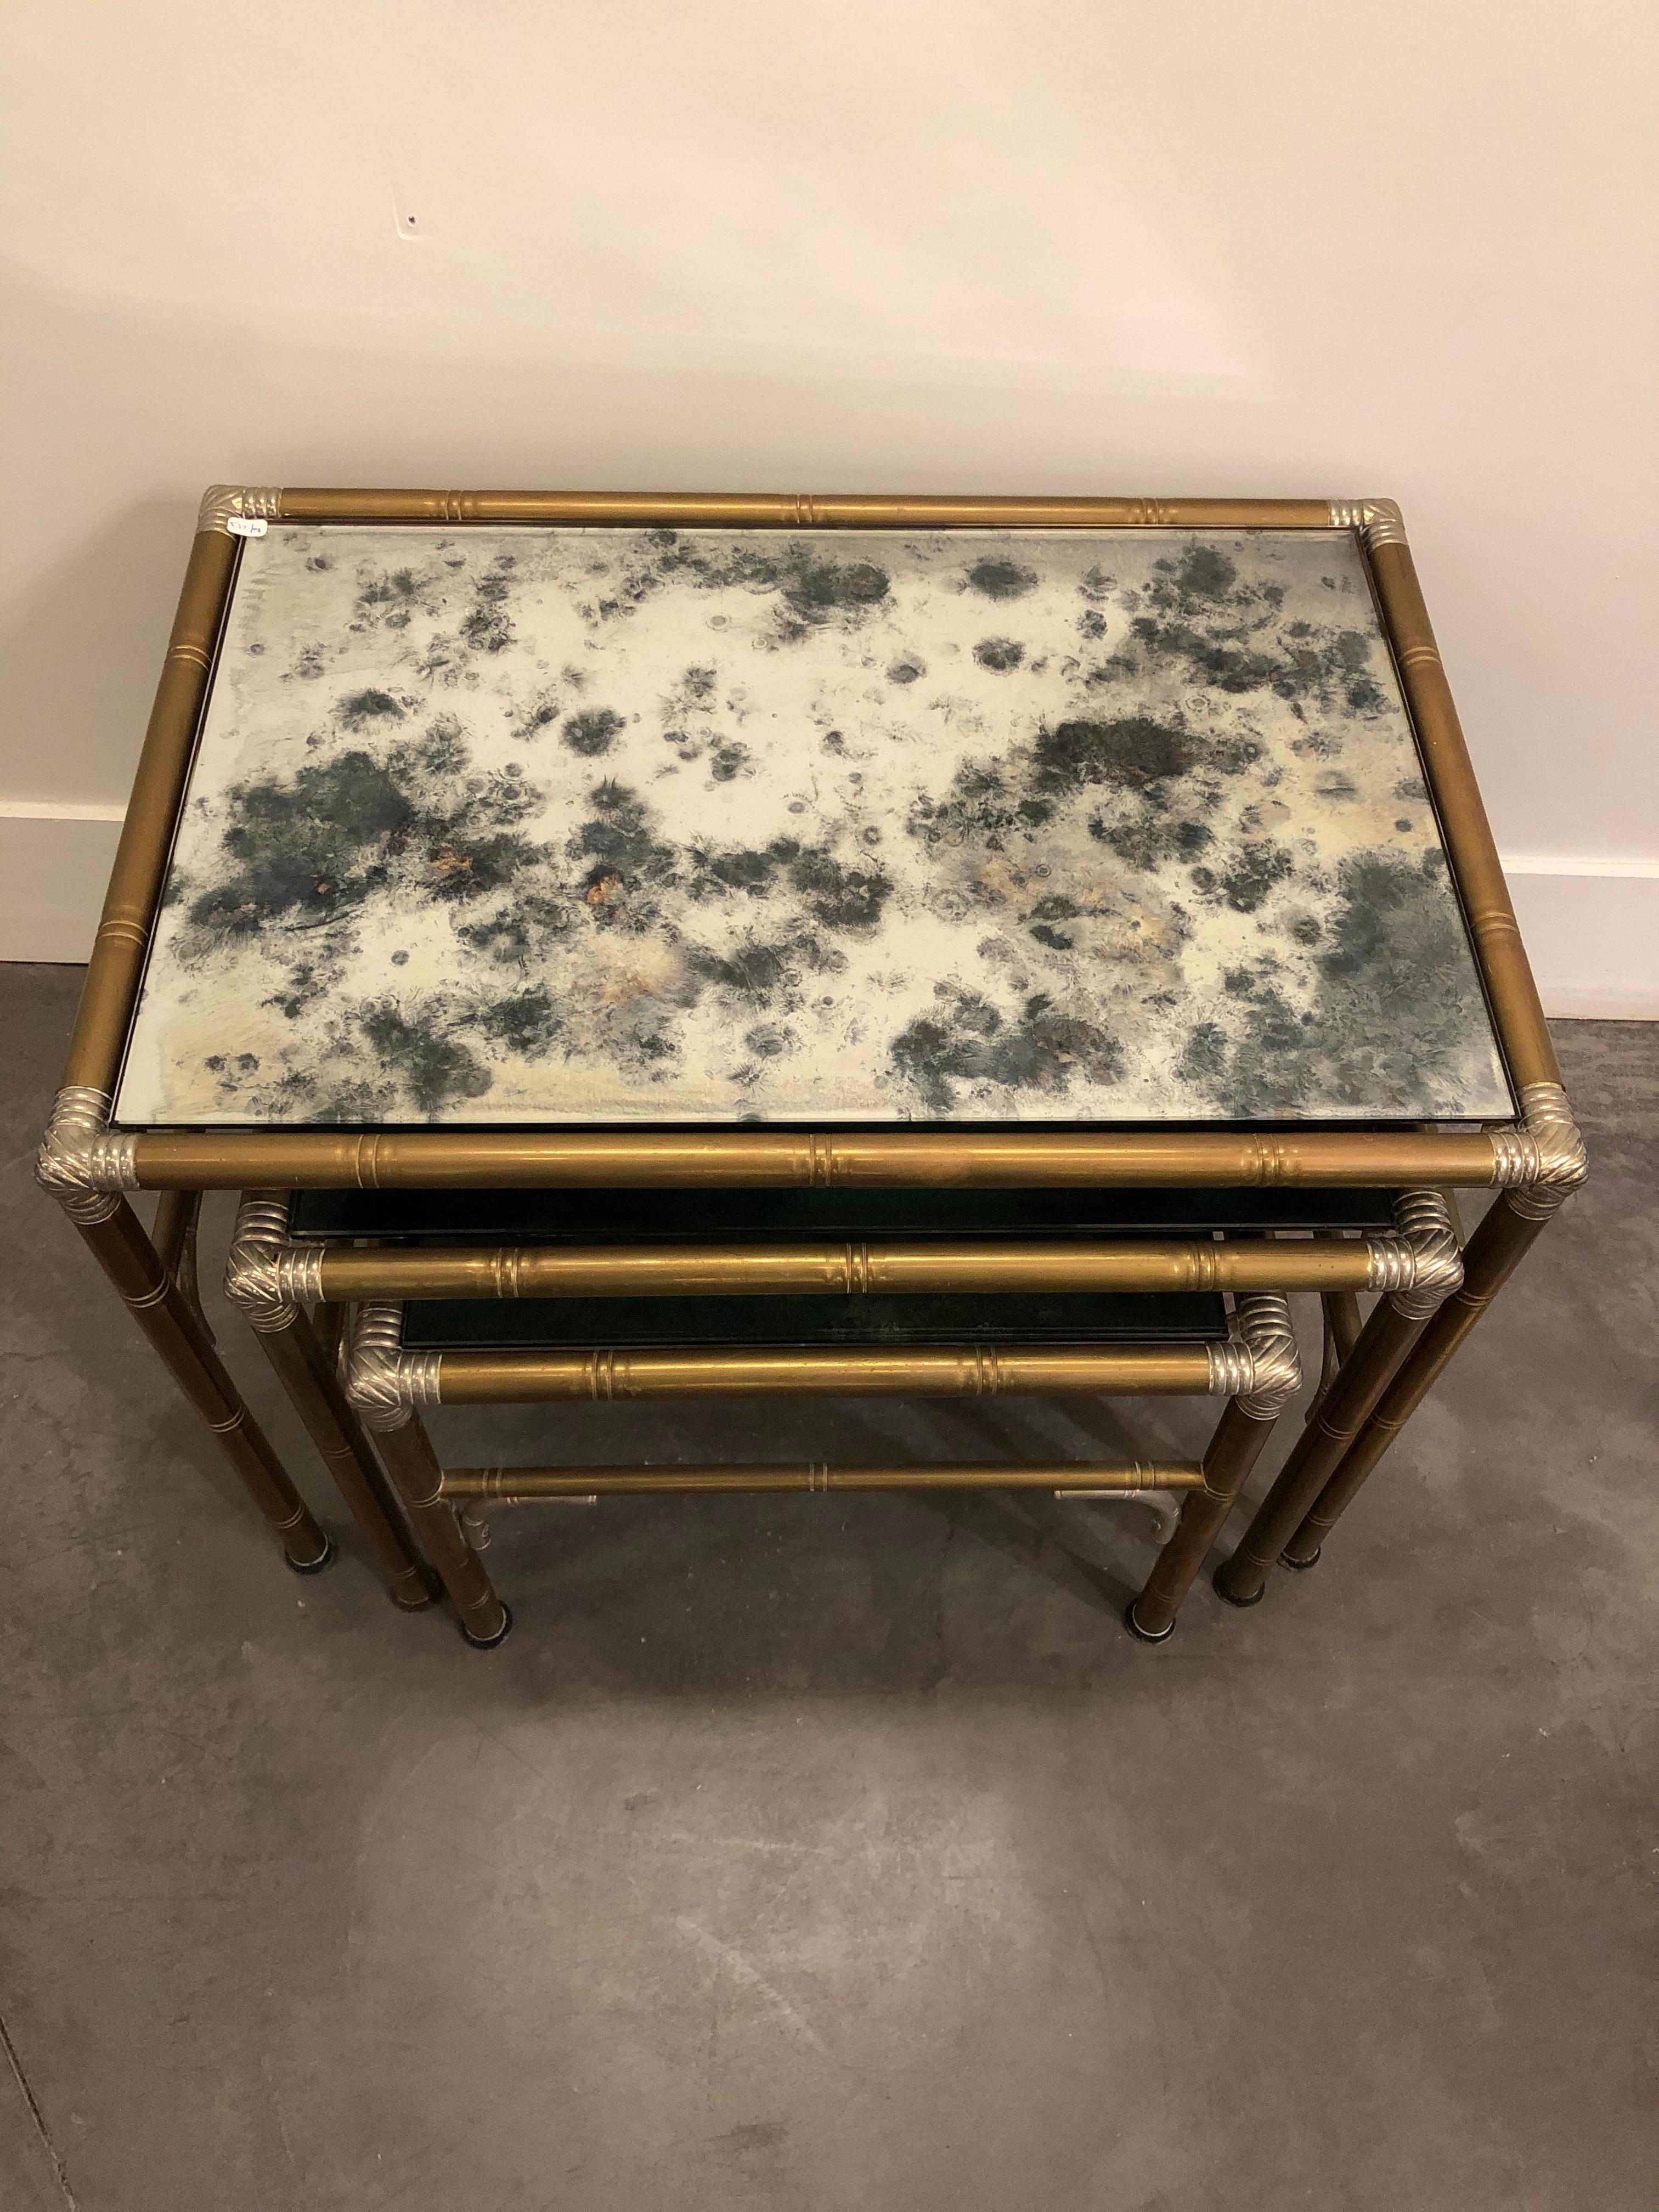 Set of 3 nesting tables in patinated metal and smoked glass finish.
Treated like bamboo joined and attached by a knot at each extremity of the square.